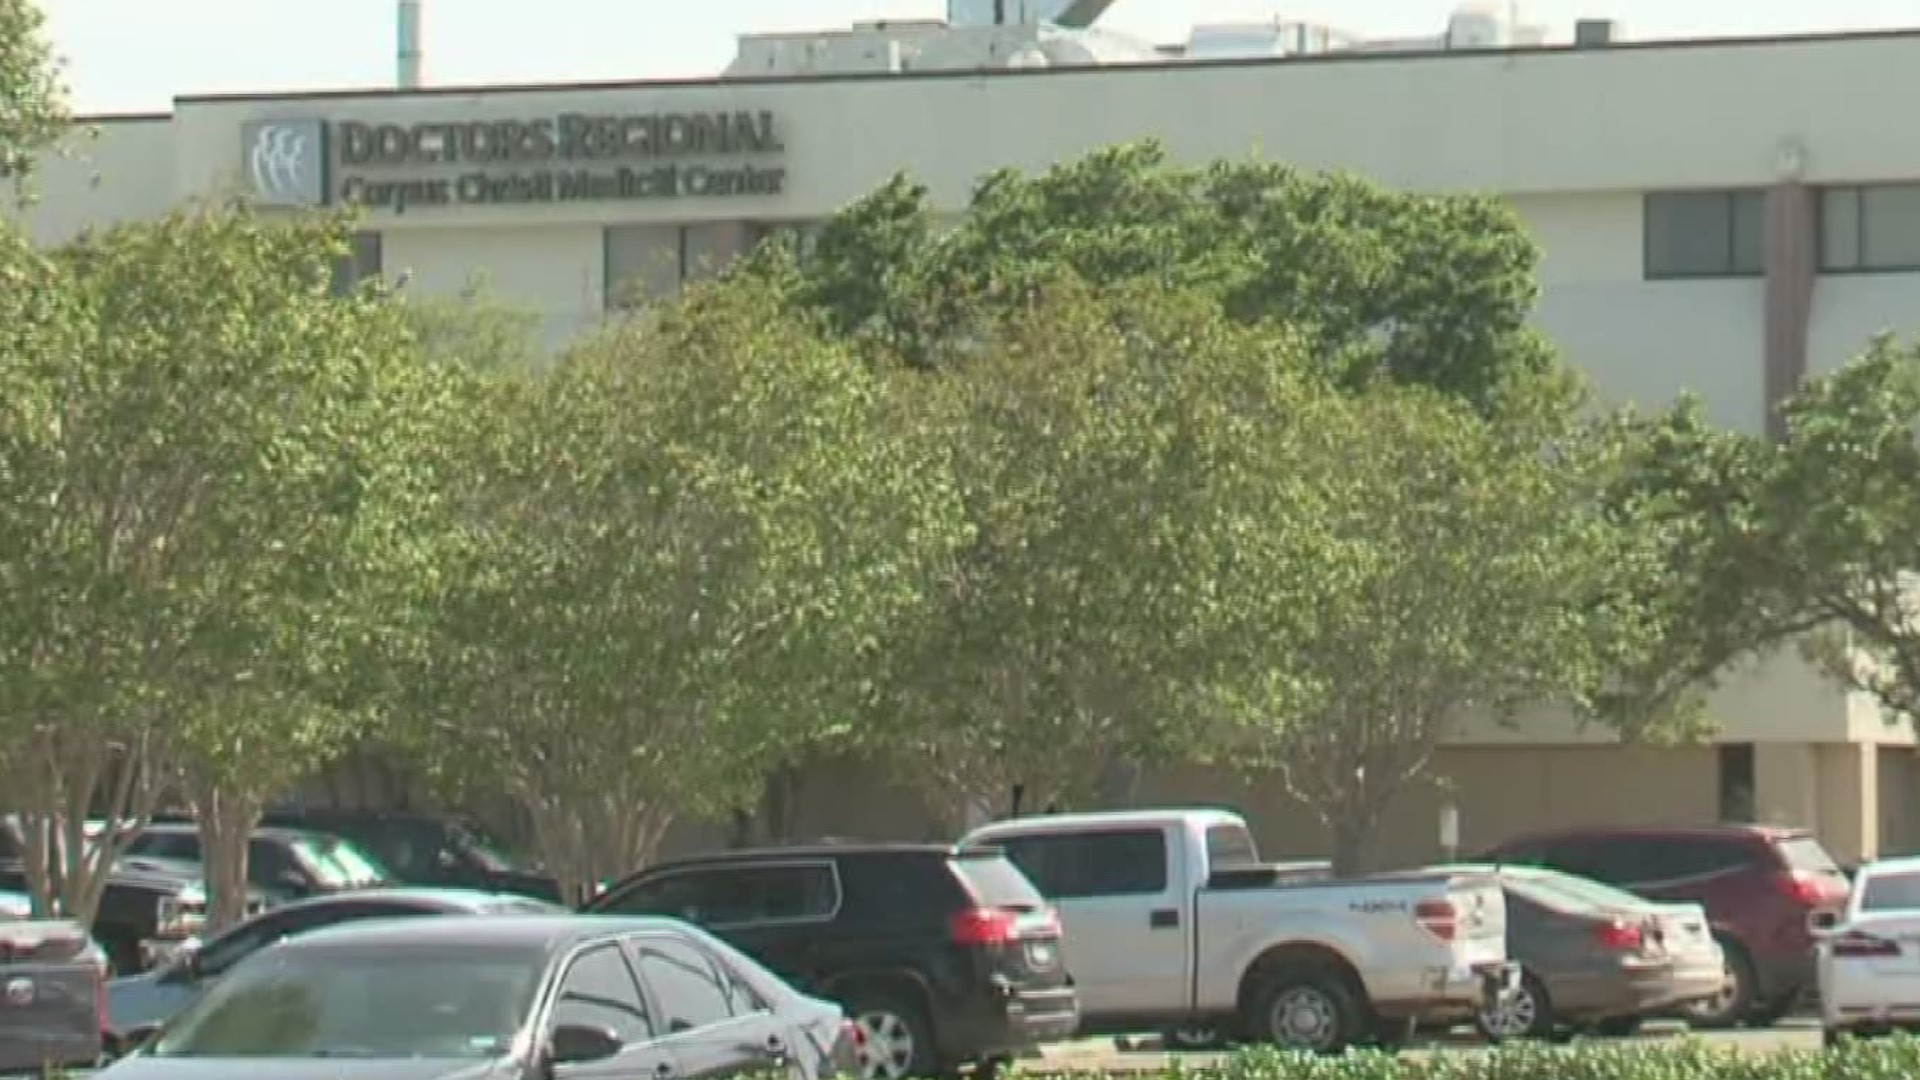 Some surgical procedures at Corpus Christi Medical Center Doctor's Regional Hospital are being diverted to their Bay Area Hospital campus after a recent survey indicated a need for upgrades in their operating rooms.